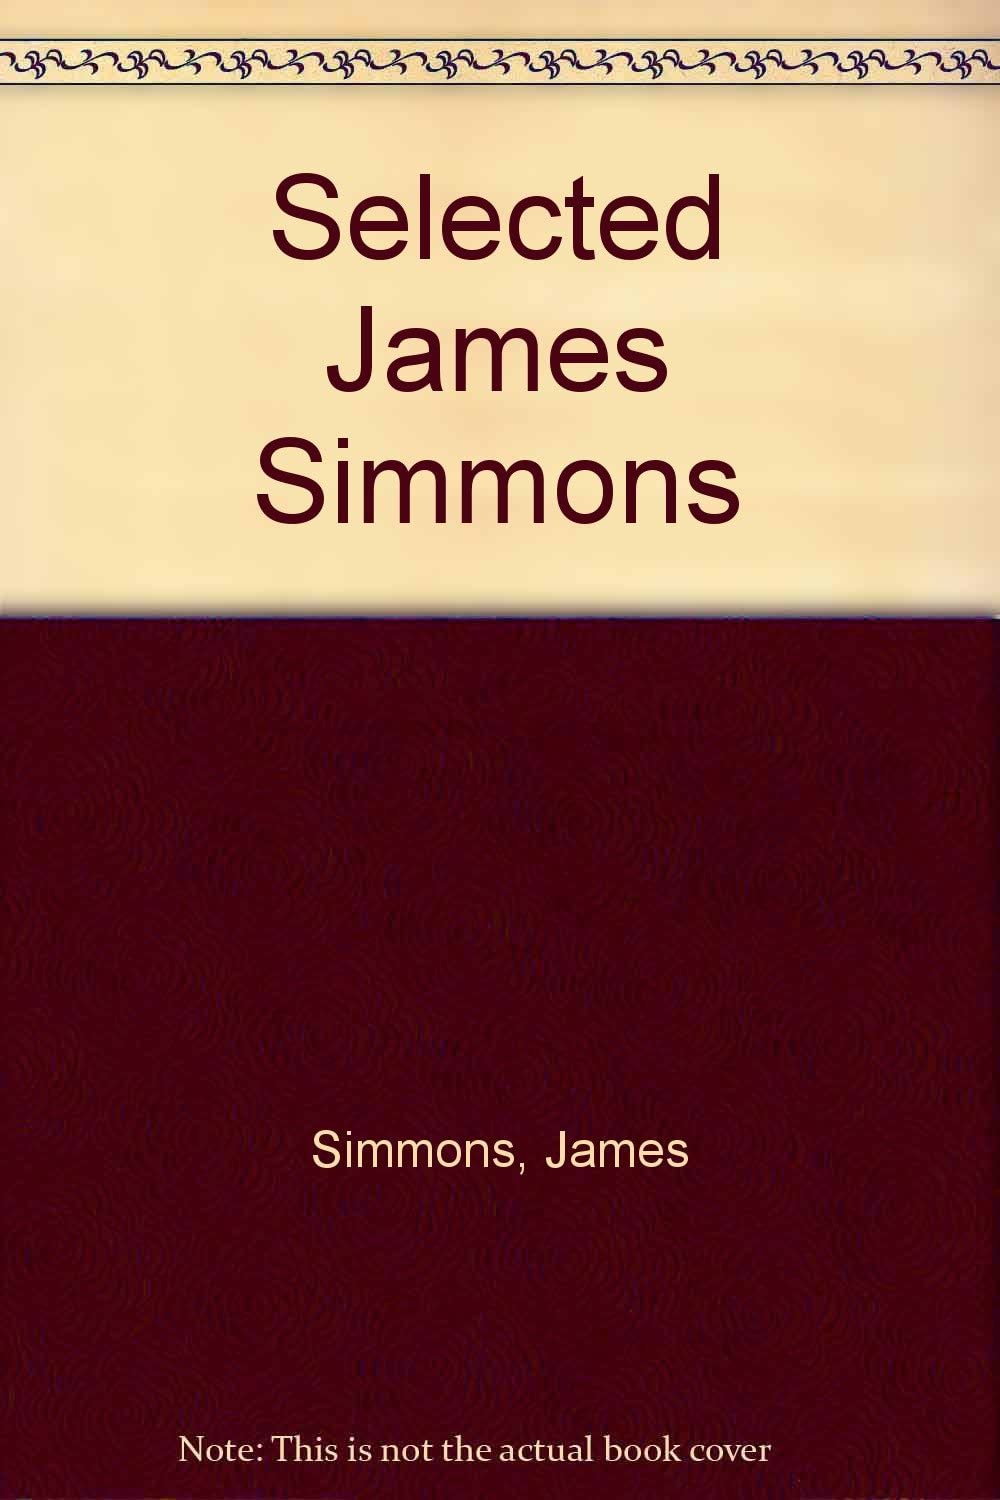 The selected James Simmons